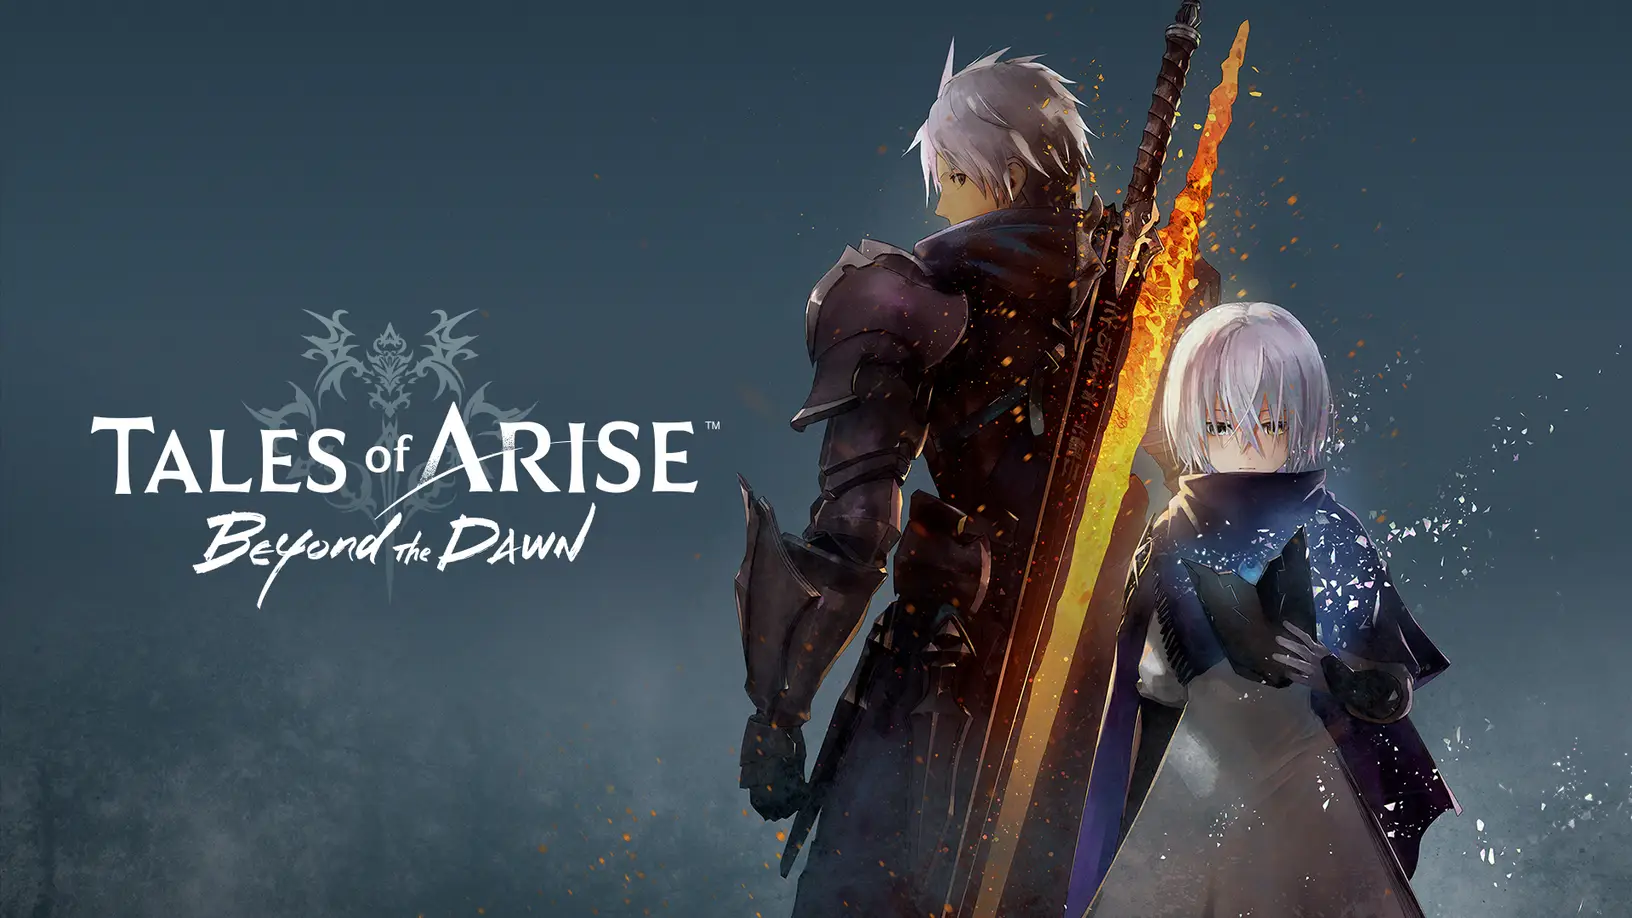 Tales of Arise Beyond the Dawn Reveals Battle Theme, “Flame of the New Dawn”